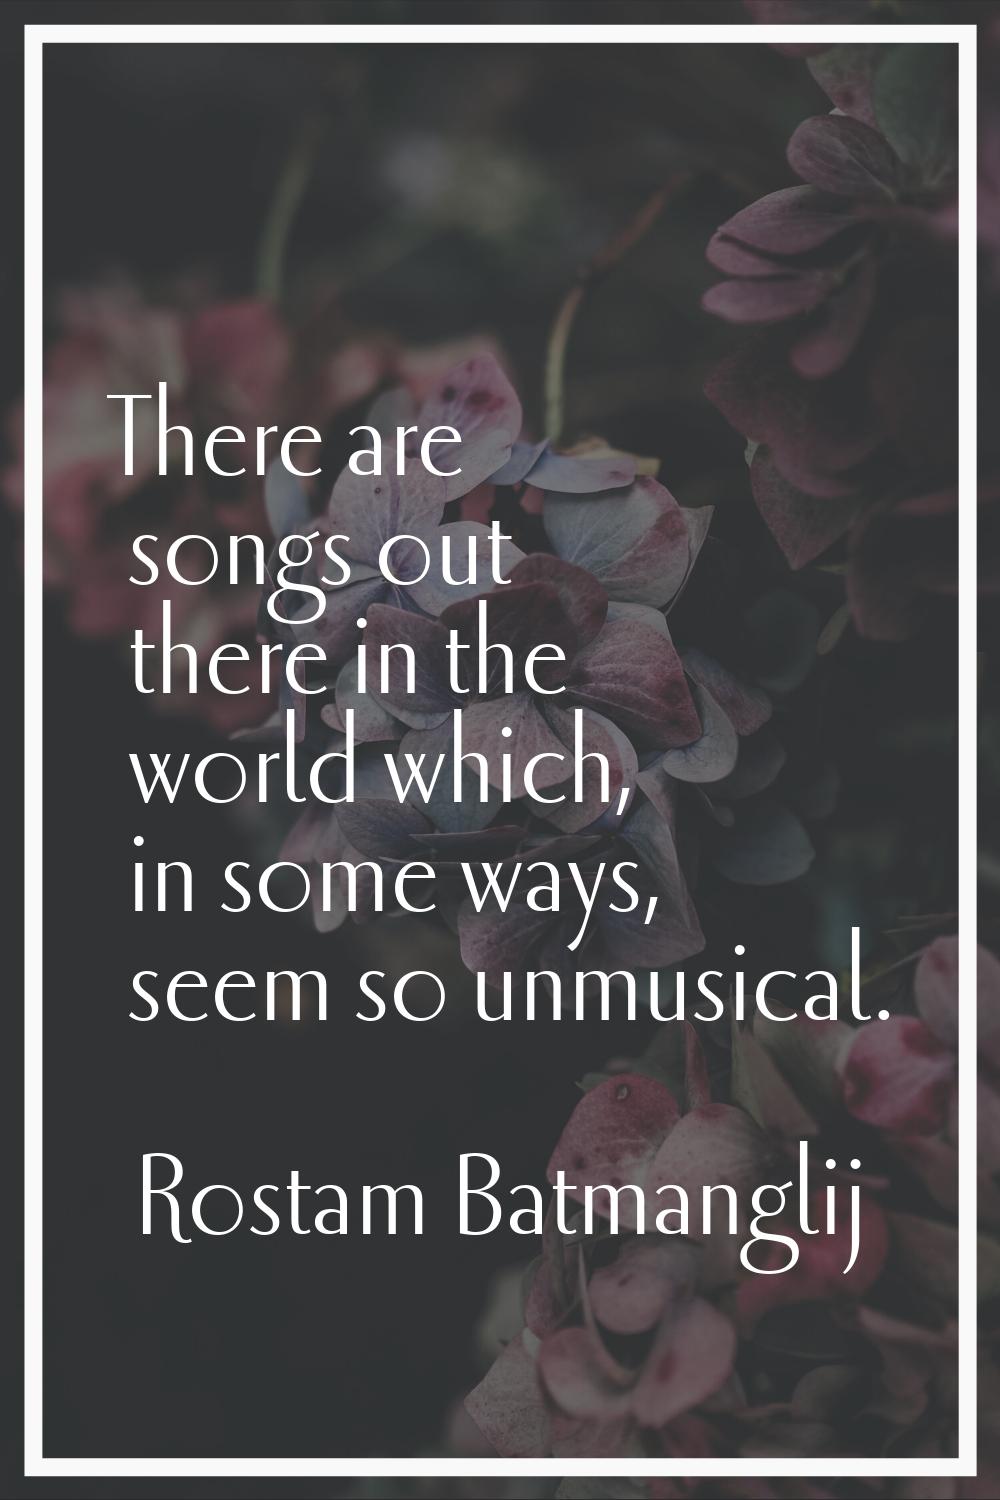 There are songs out there in the world which, in some ways, seem so unmusical.